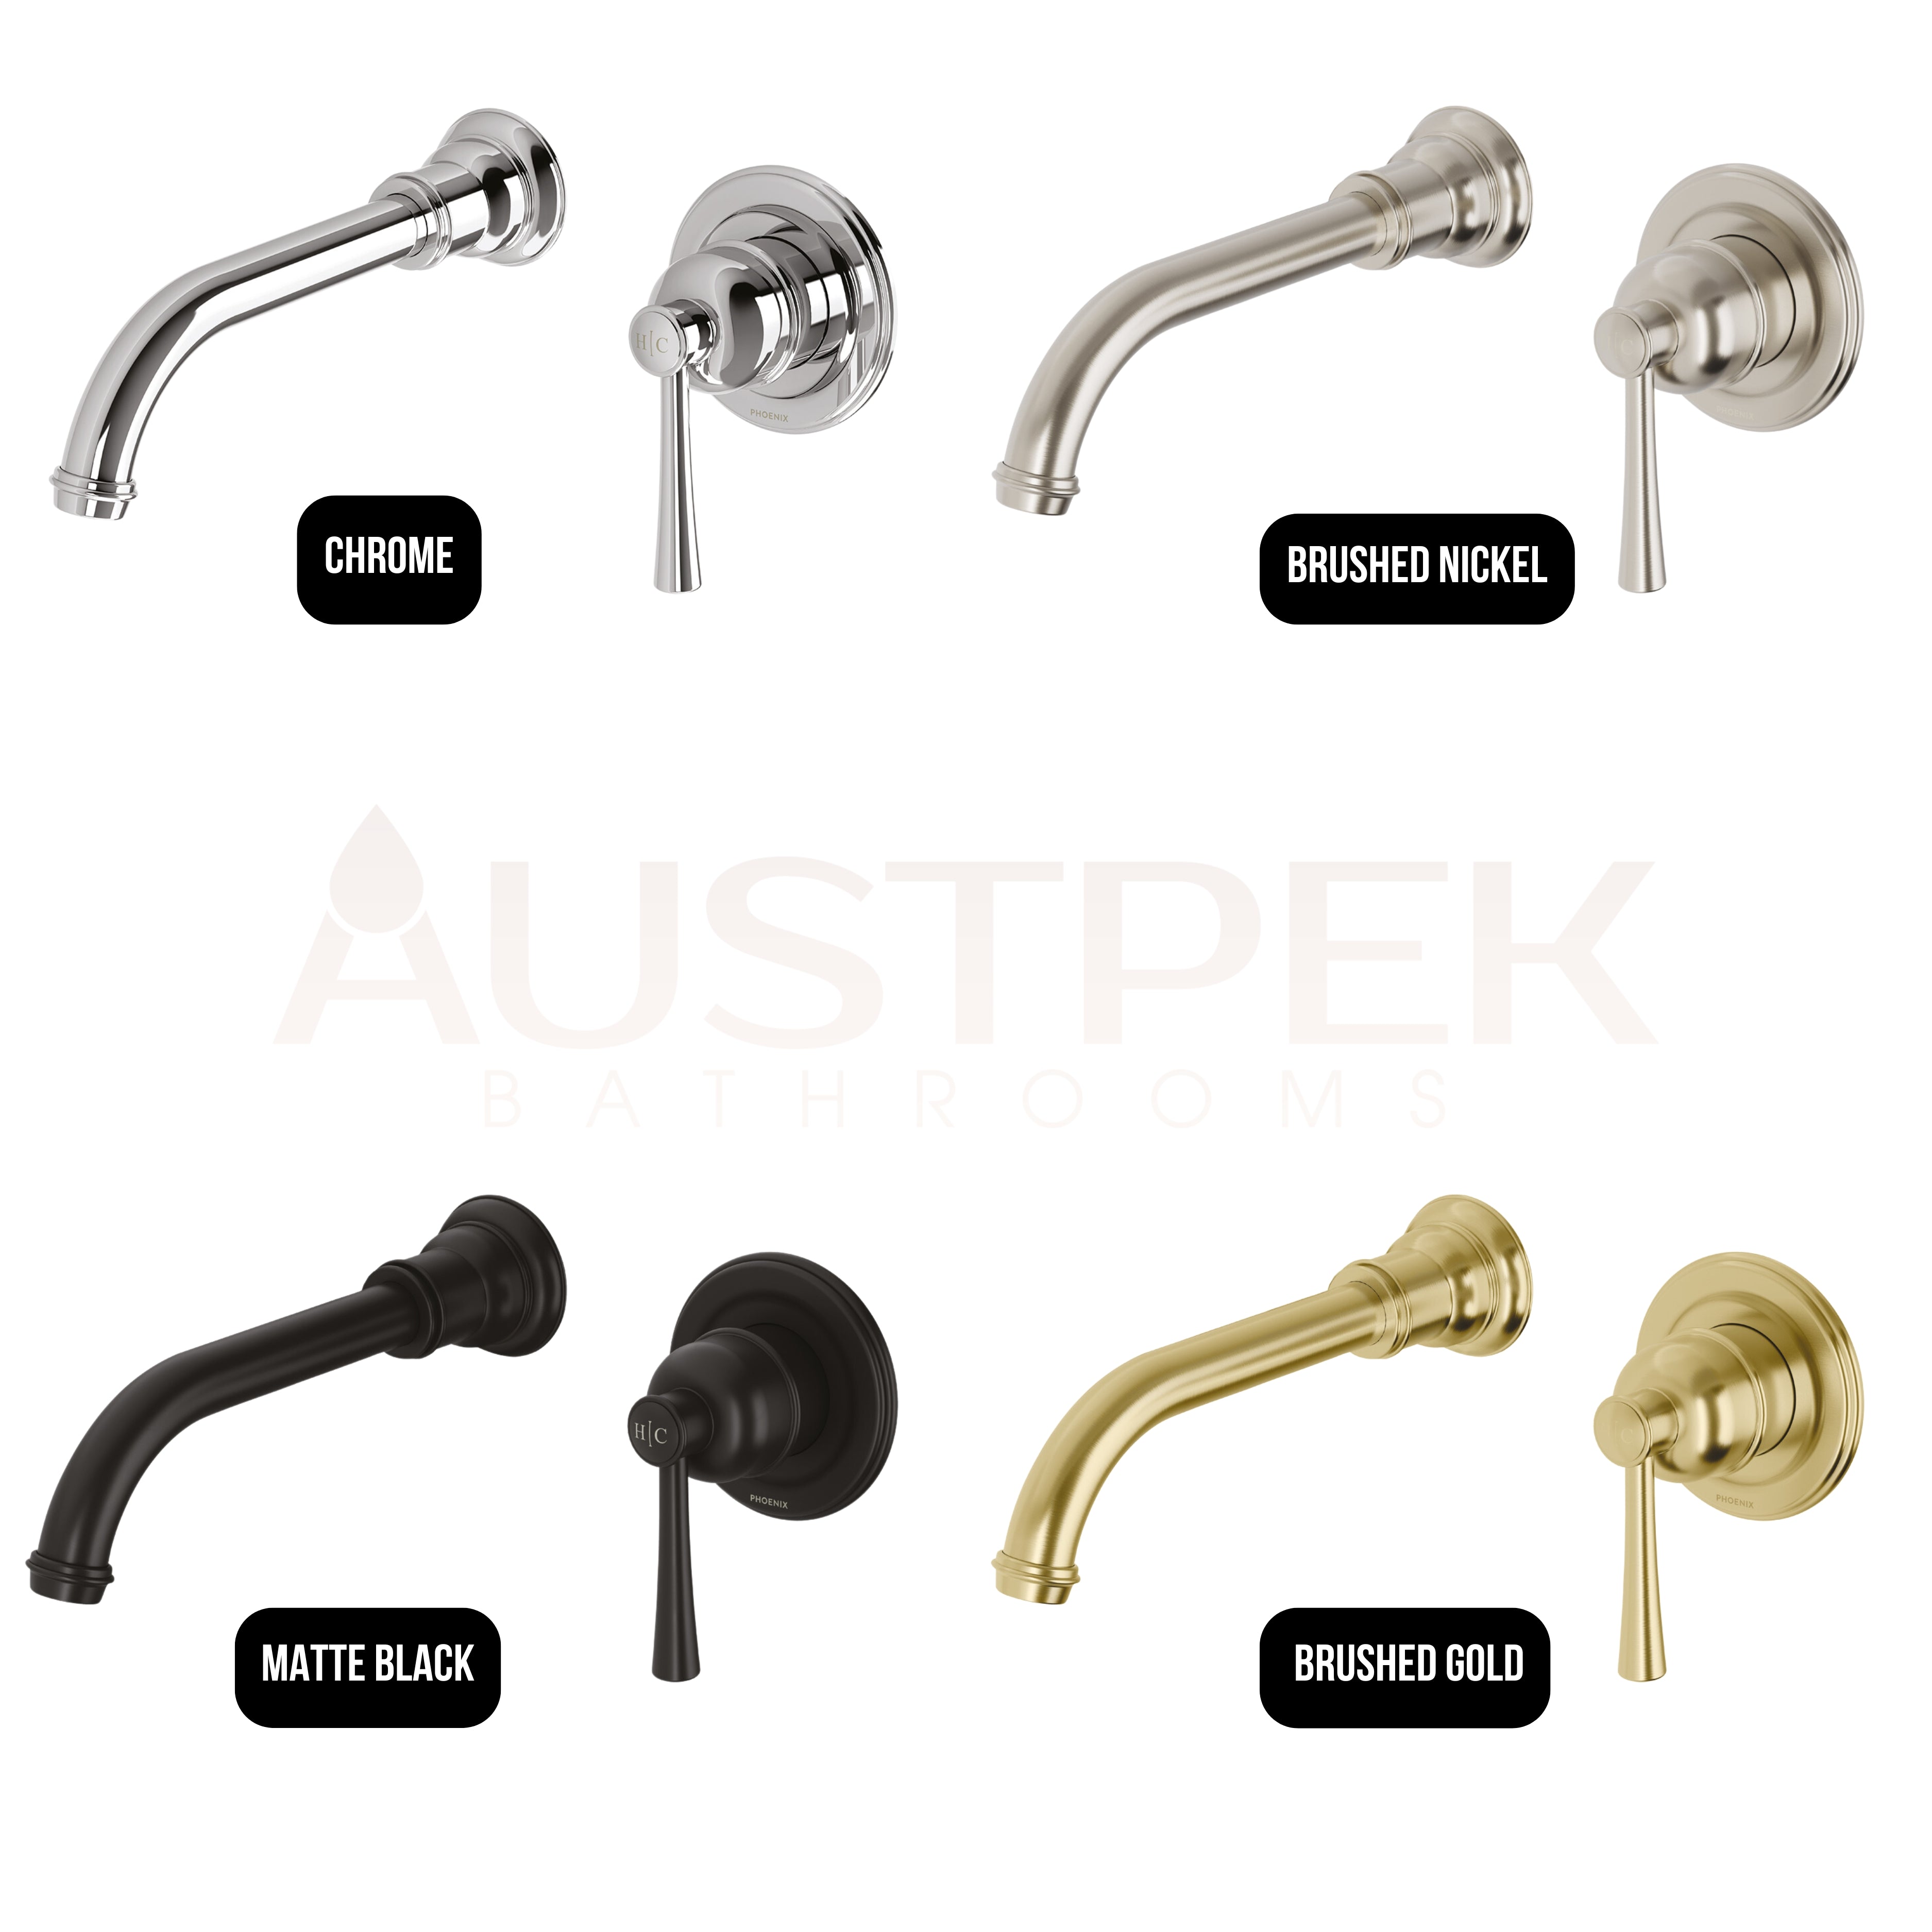 PHOENIX CROMFORD SWITCHMIX WALL BASIN MIXER SET FIT-OFF AND ROUGH-IN KIT 200MM BRUSHED NICKEL